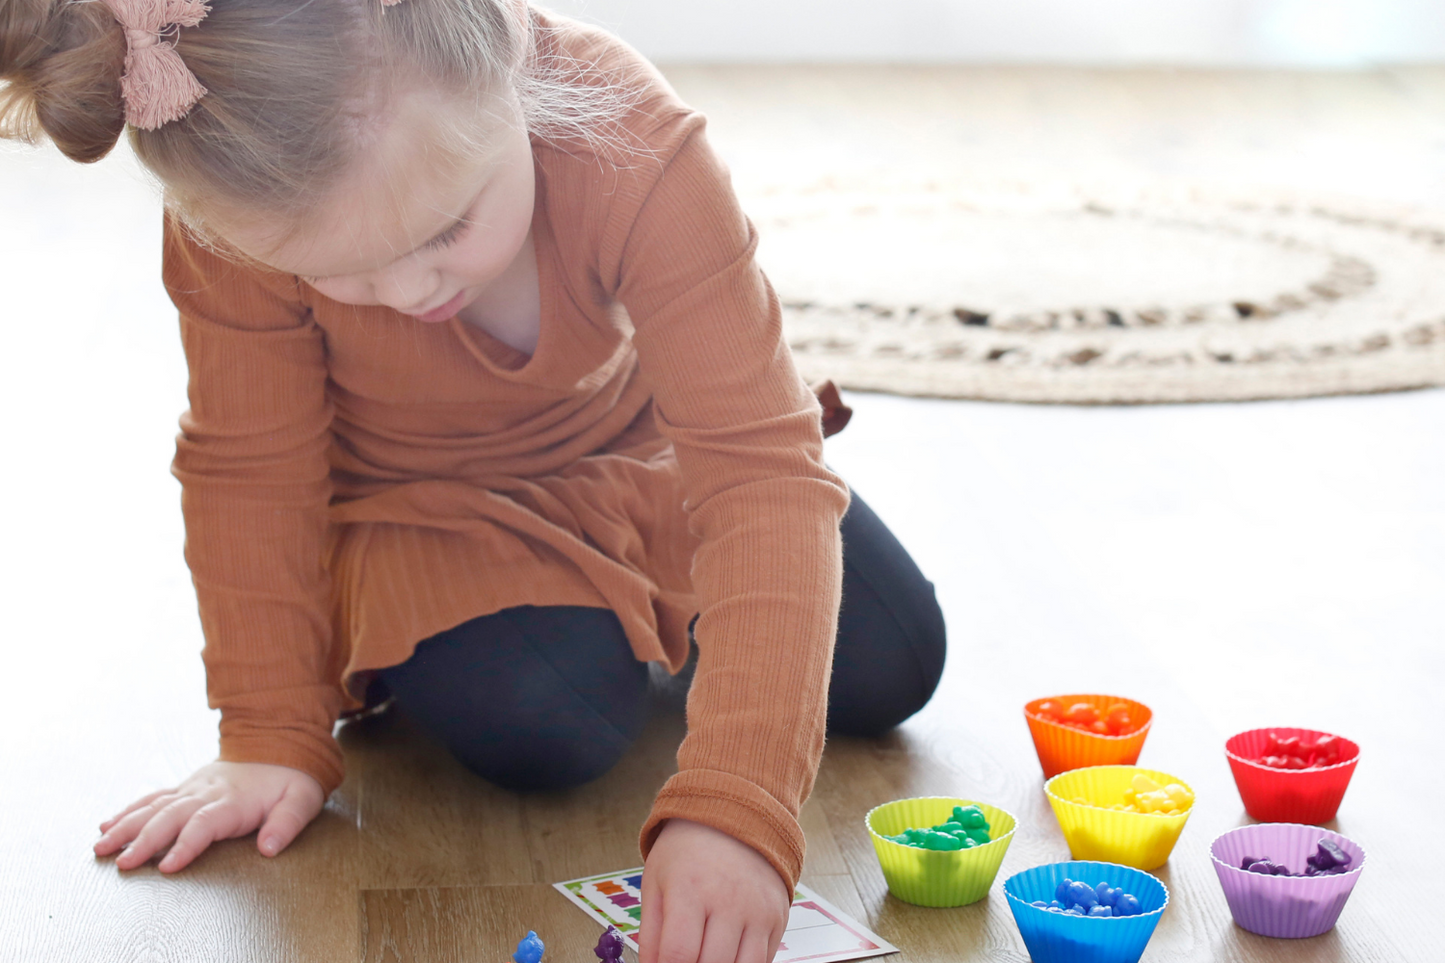 build confidence with your preschooler with hands-on learning, rainbow counting bears Fun Learn Grow Co.